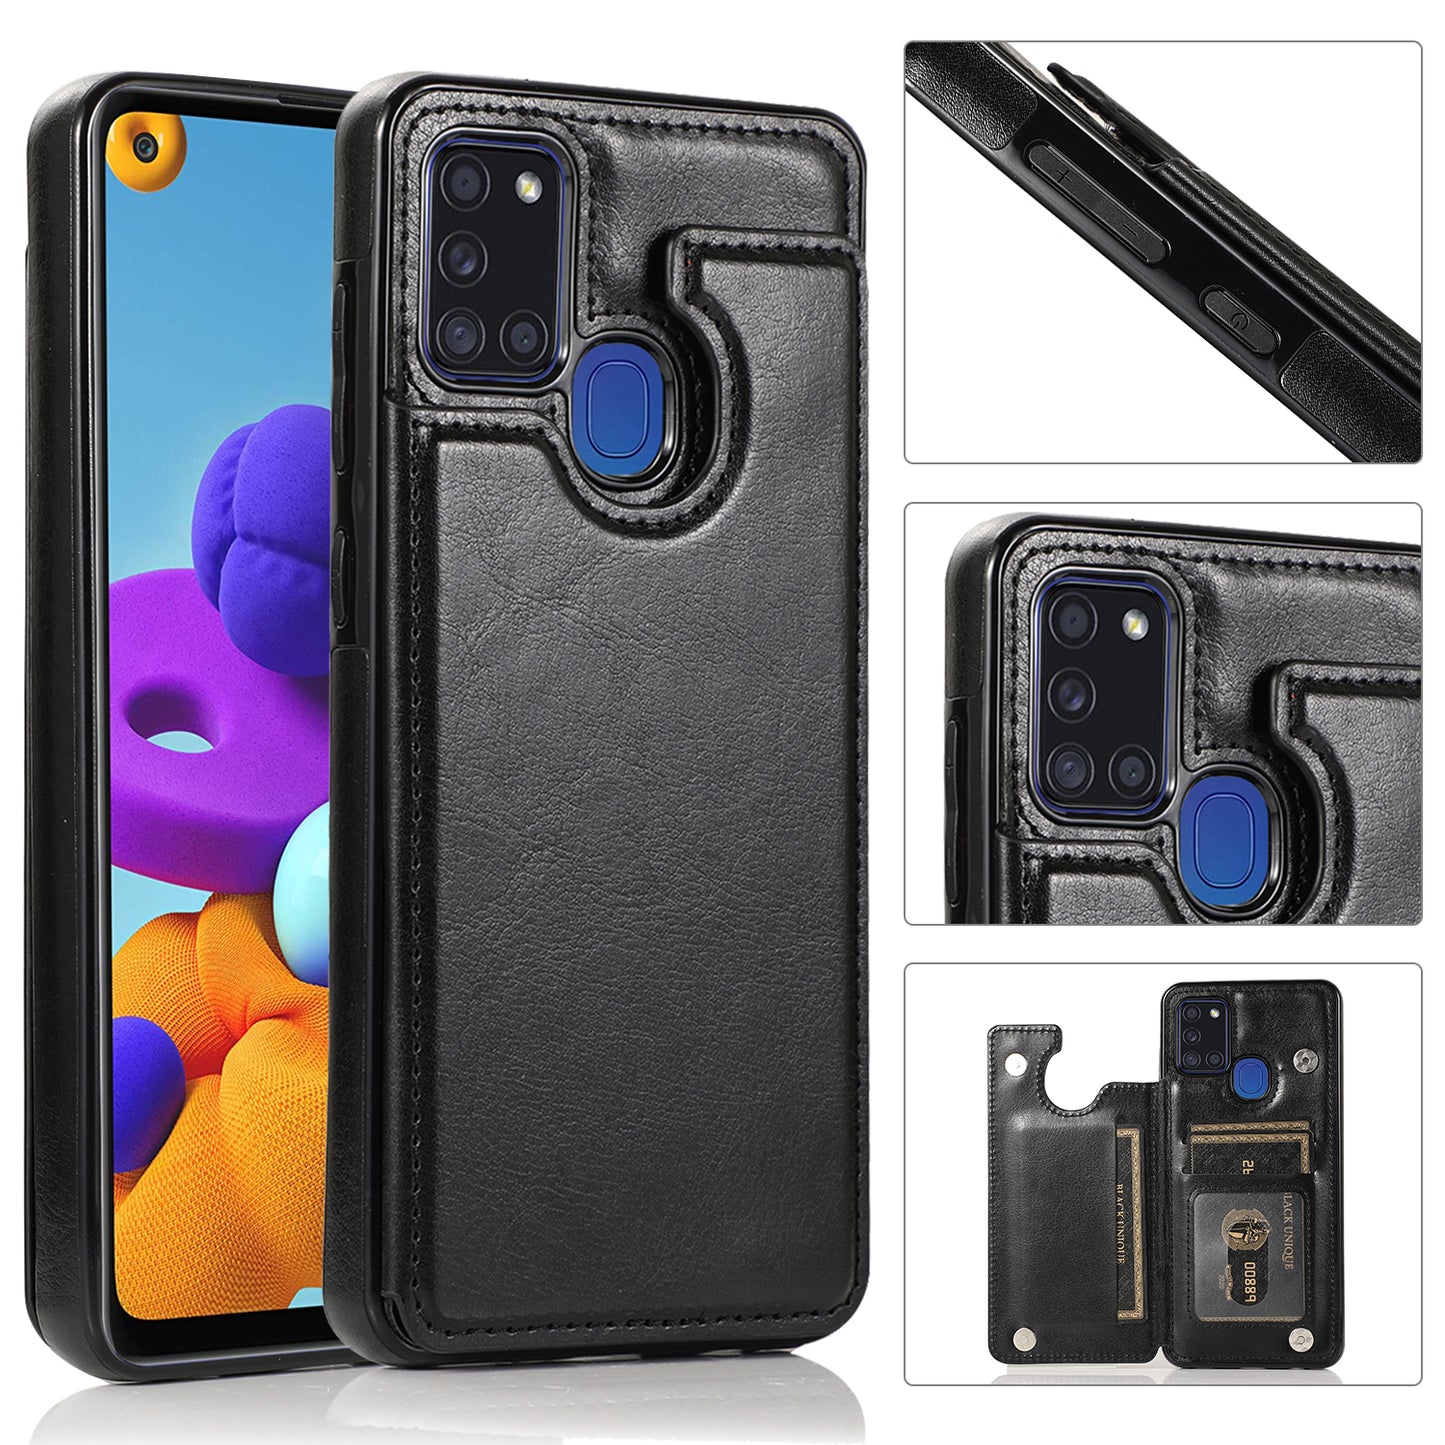 Samsung Galaxy A21s Leather Cover Double Buckles Shock Resistant Multiple Card Slots Magnetic Fold Pocket